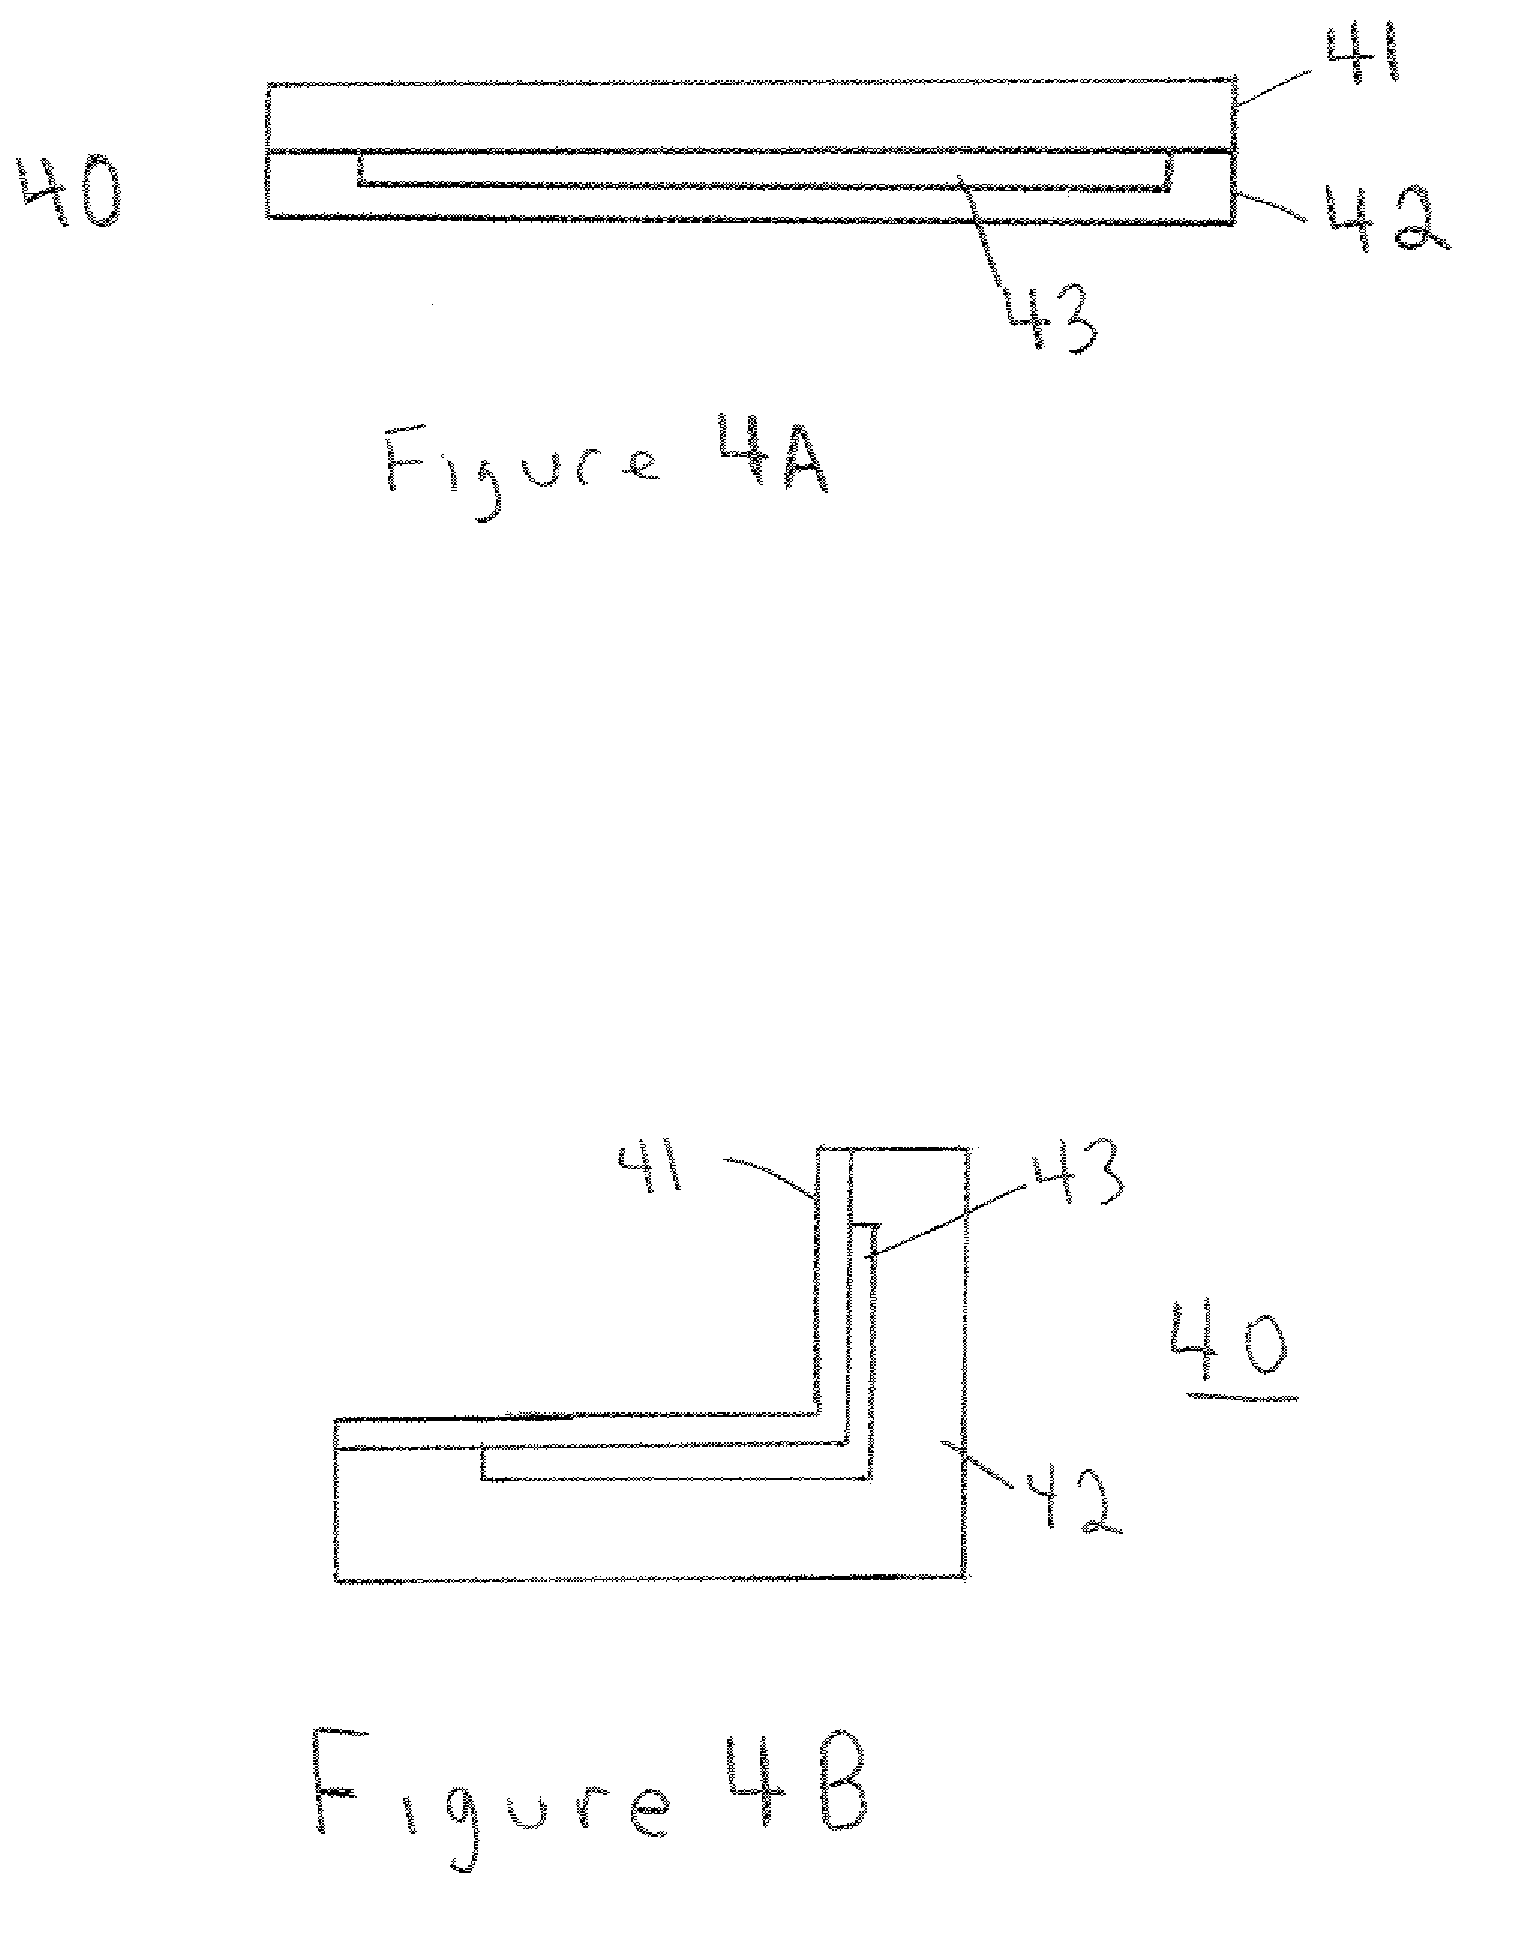 Wallboard Tape And Method of Using Same